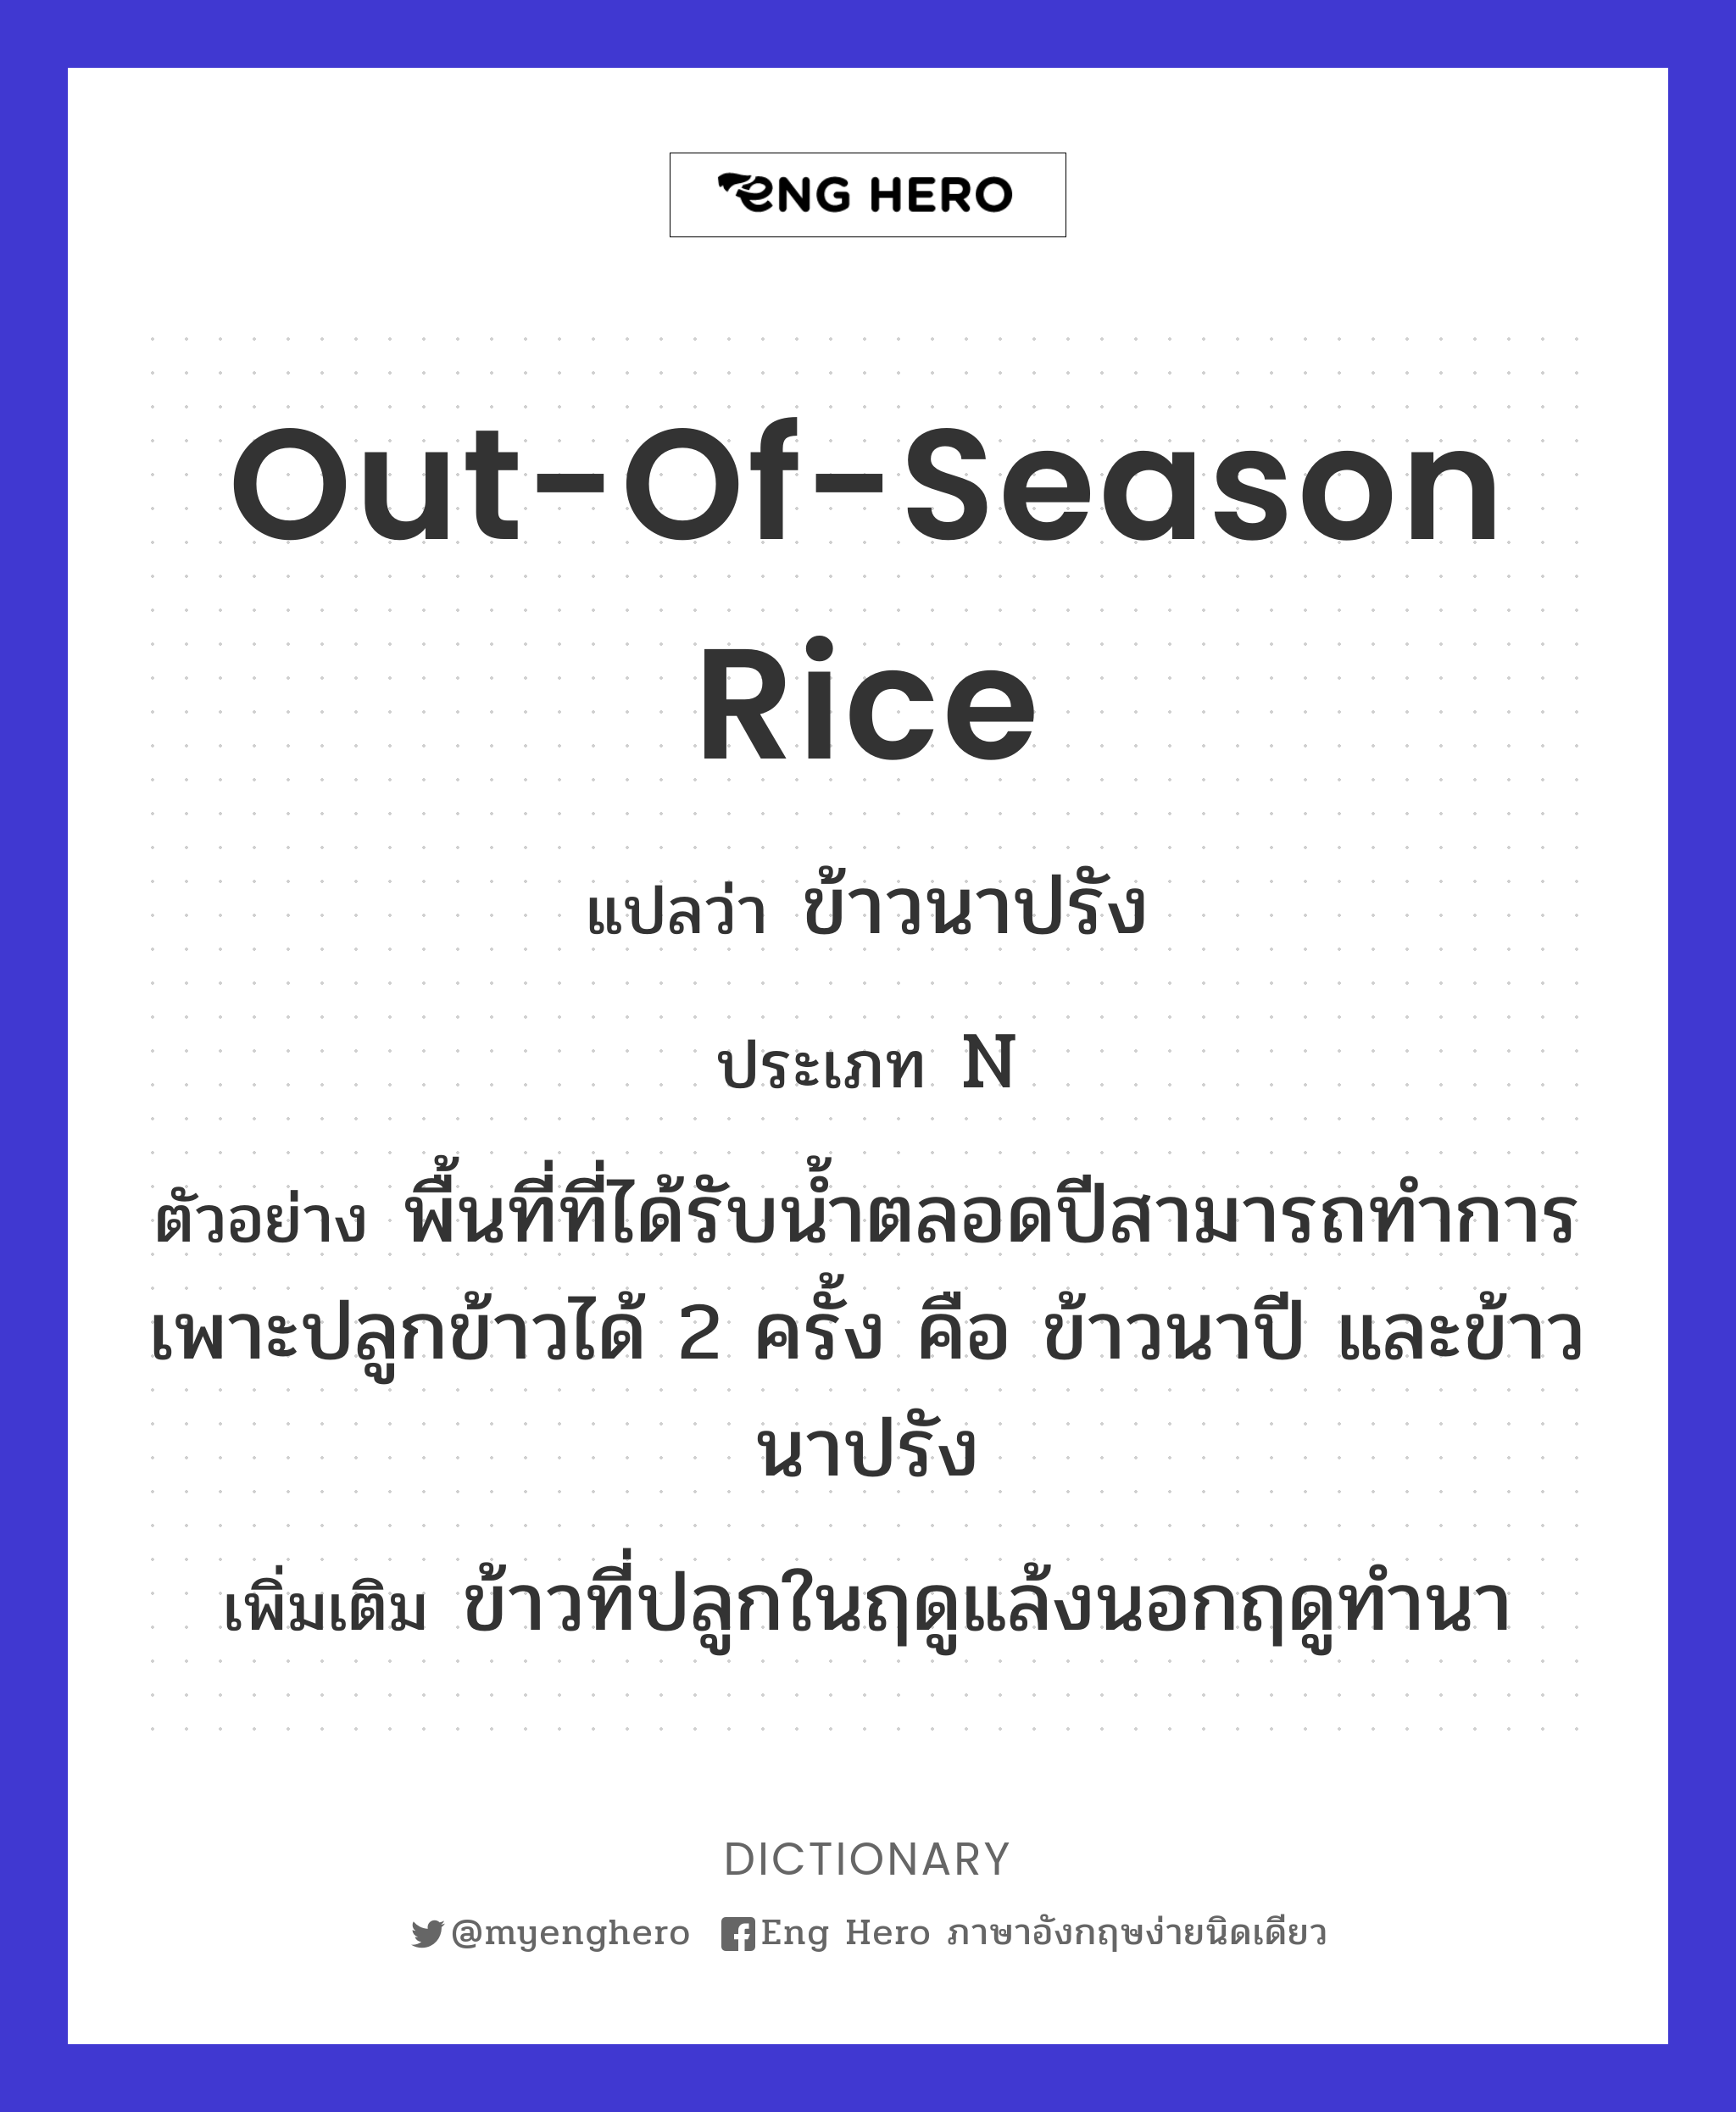 out-of-season rice